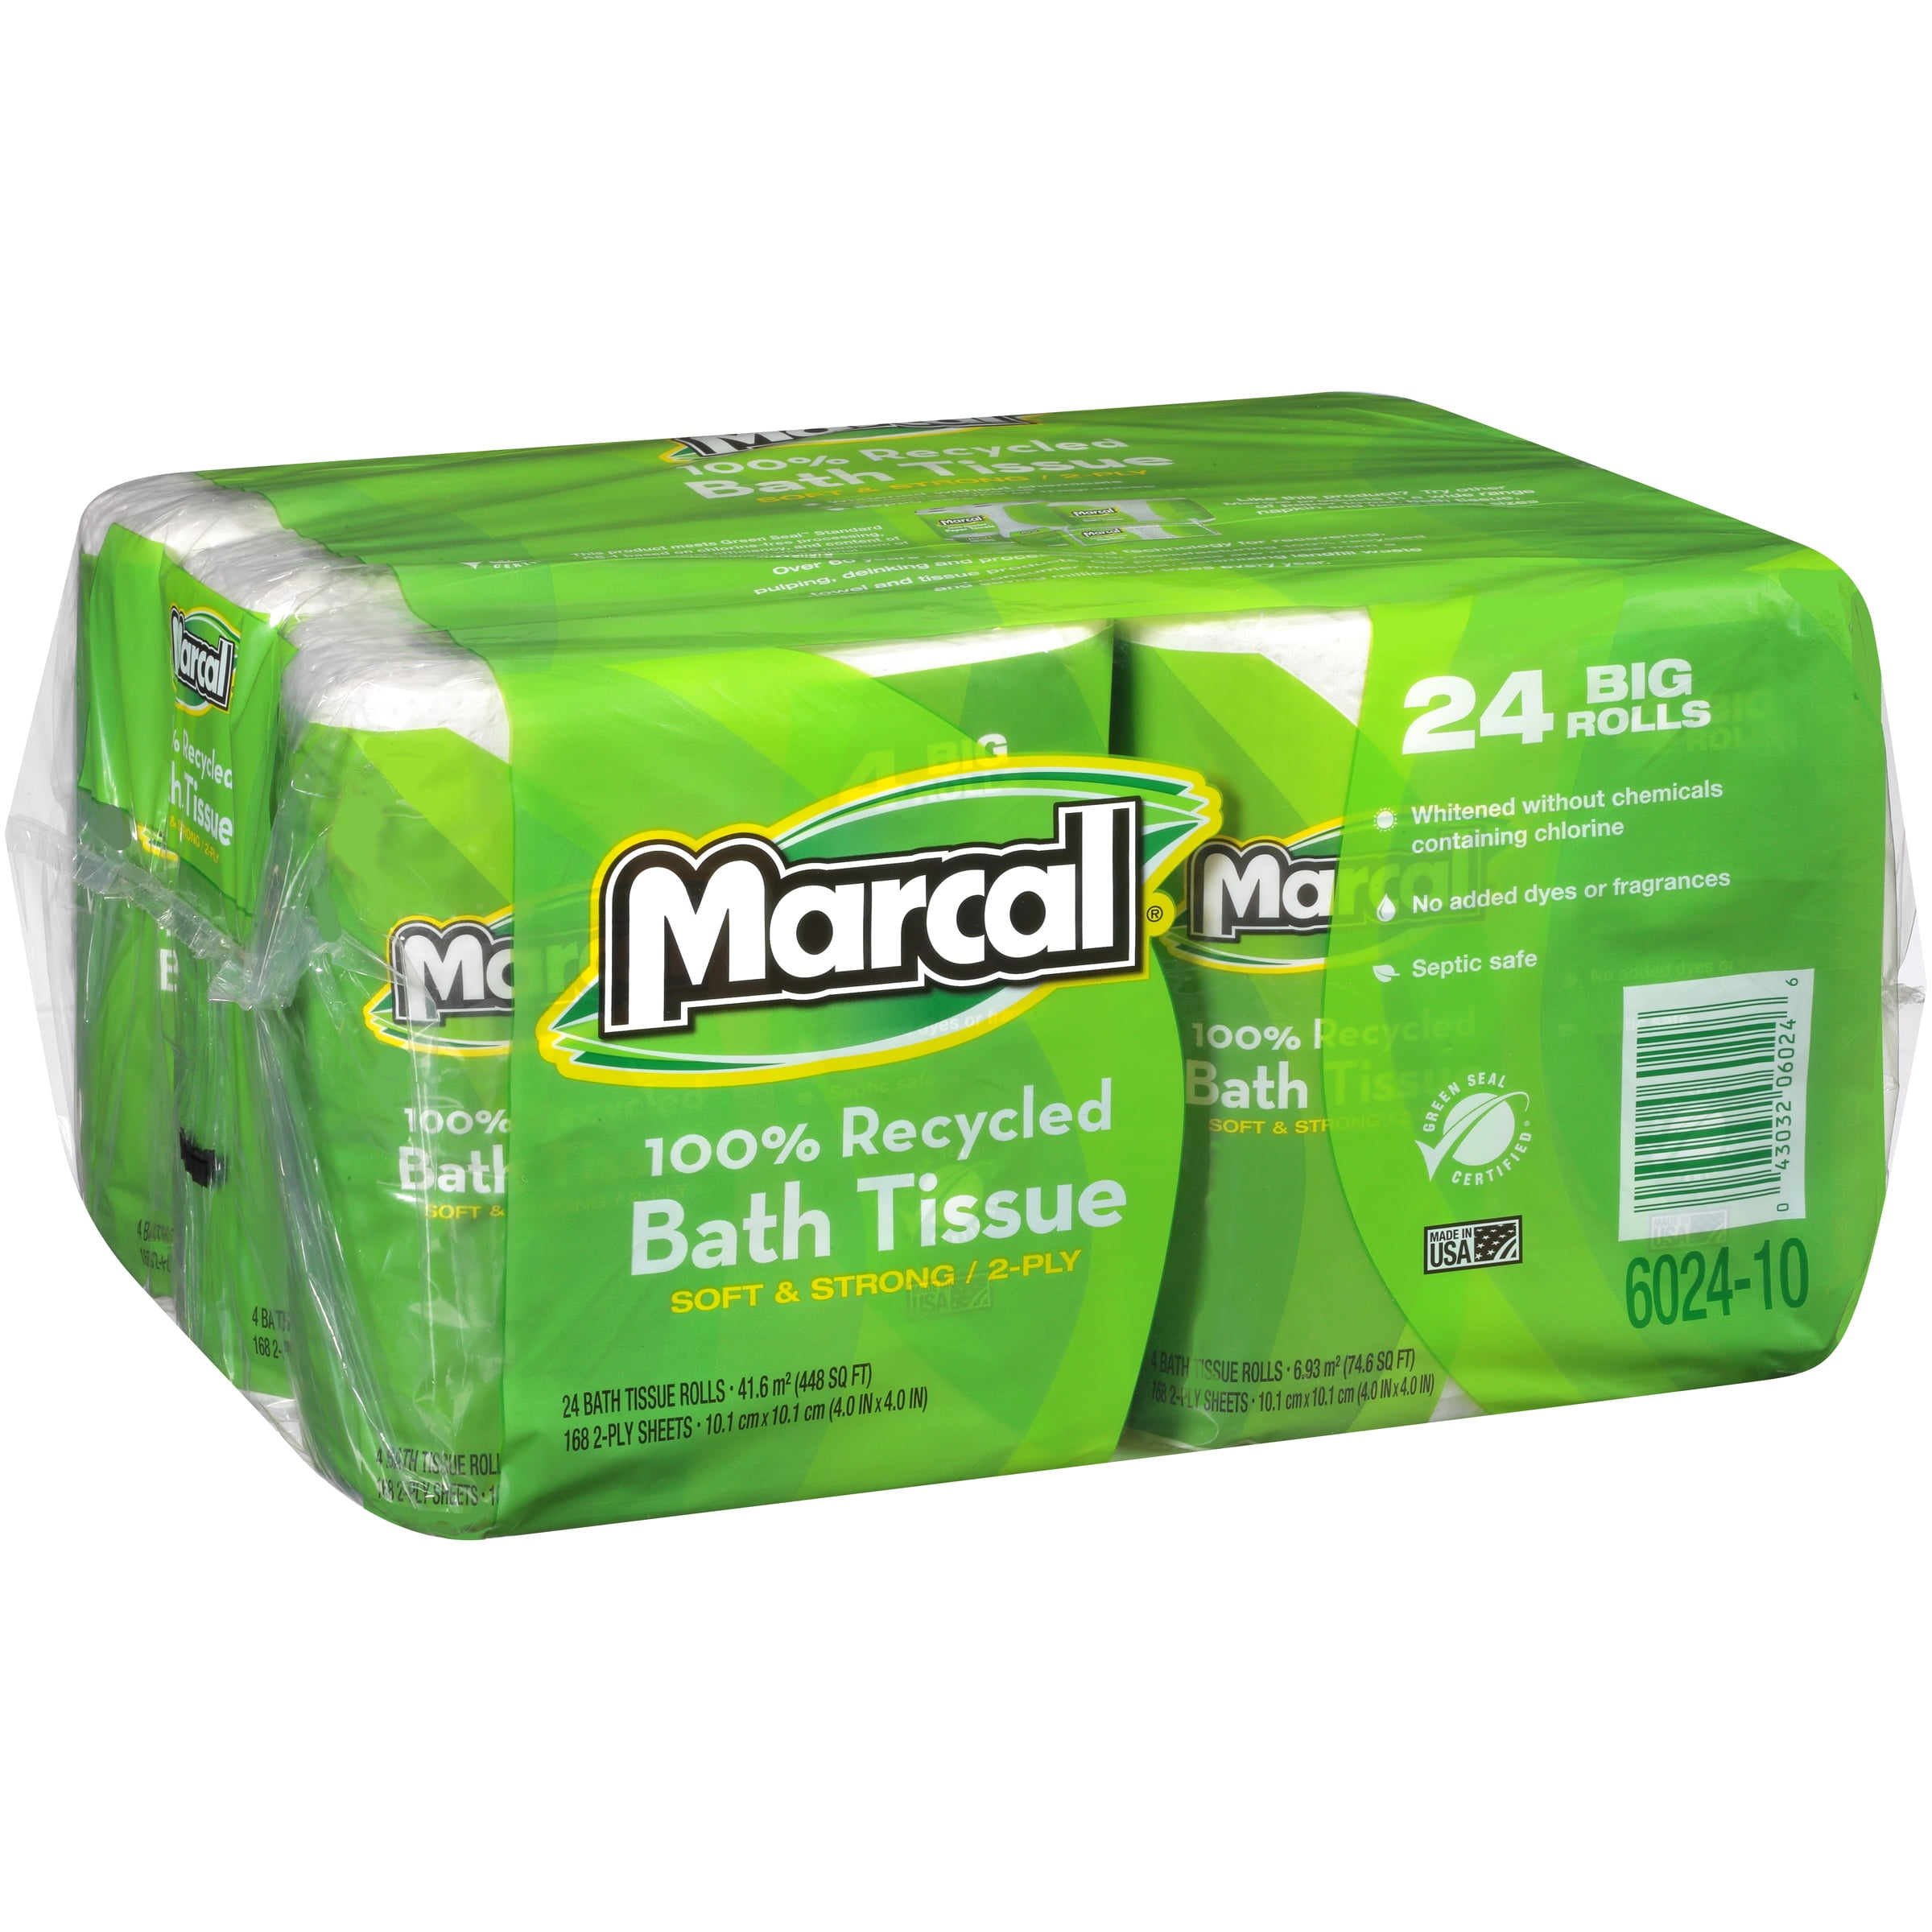 Marcal Recycled Toilet Paper, 24 Big Rolls - 1